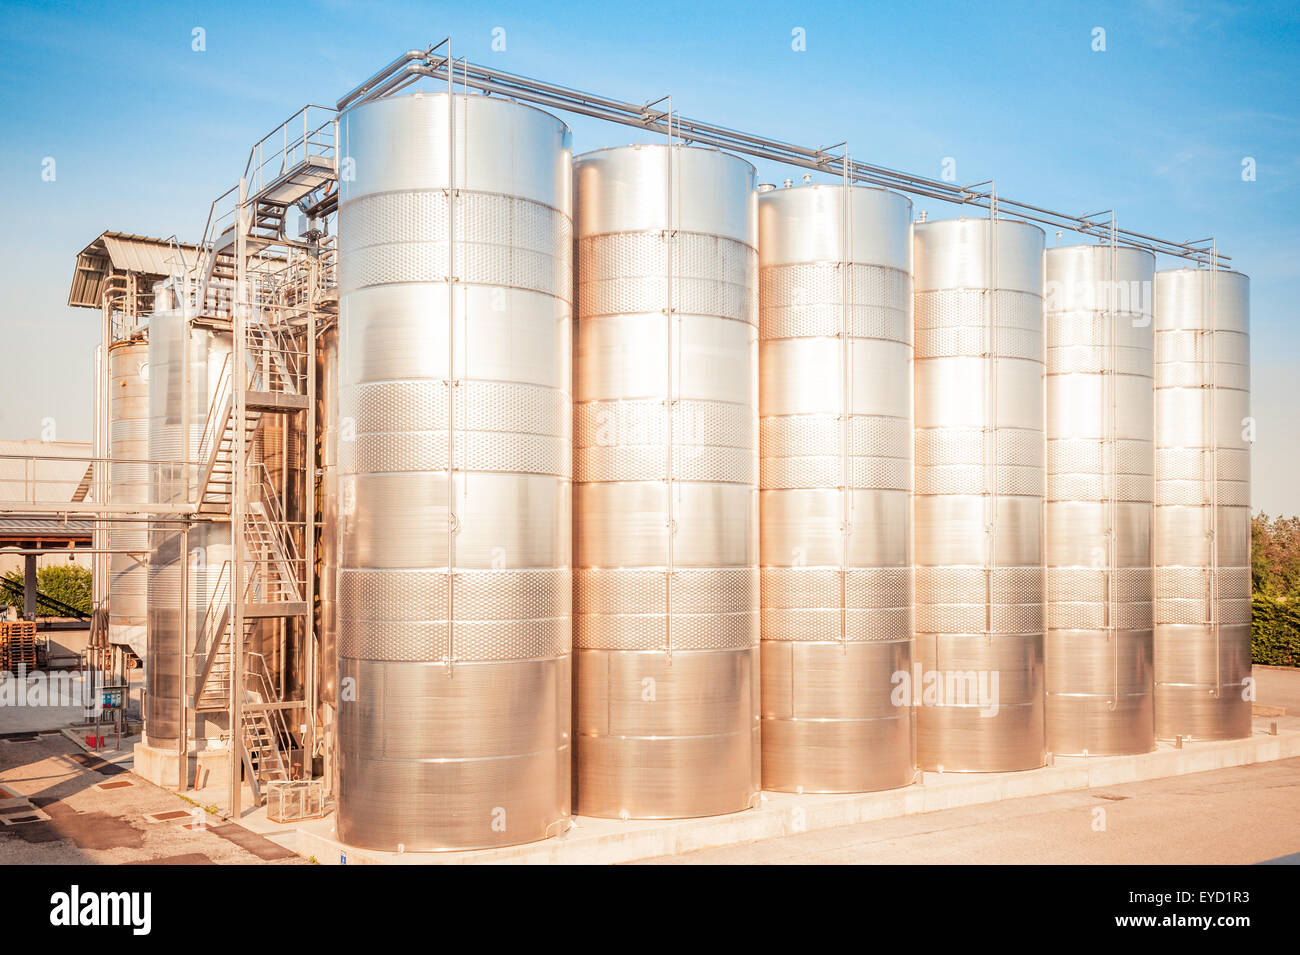 Industrial plant for storing wine, with stainless steel containers, at the sunset sun Stock Photo